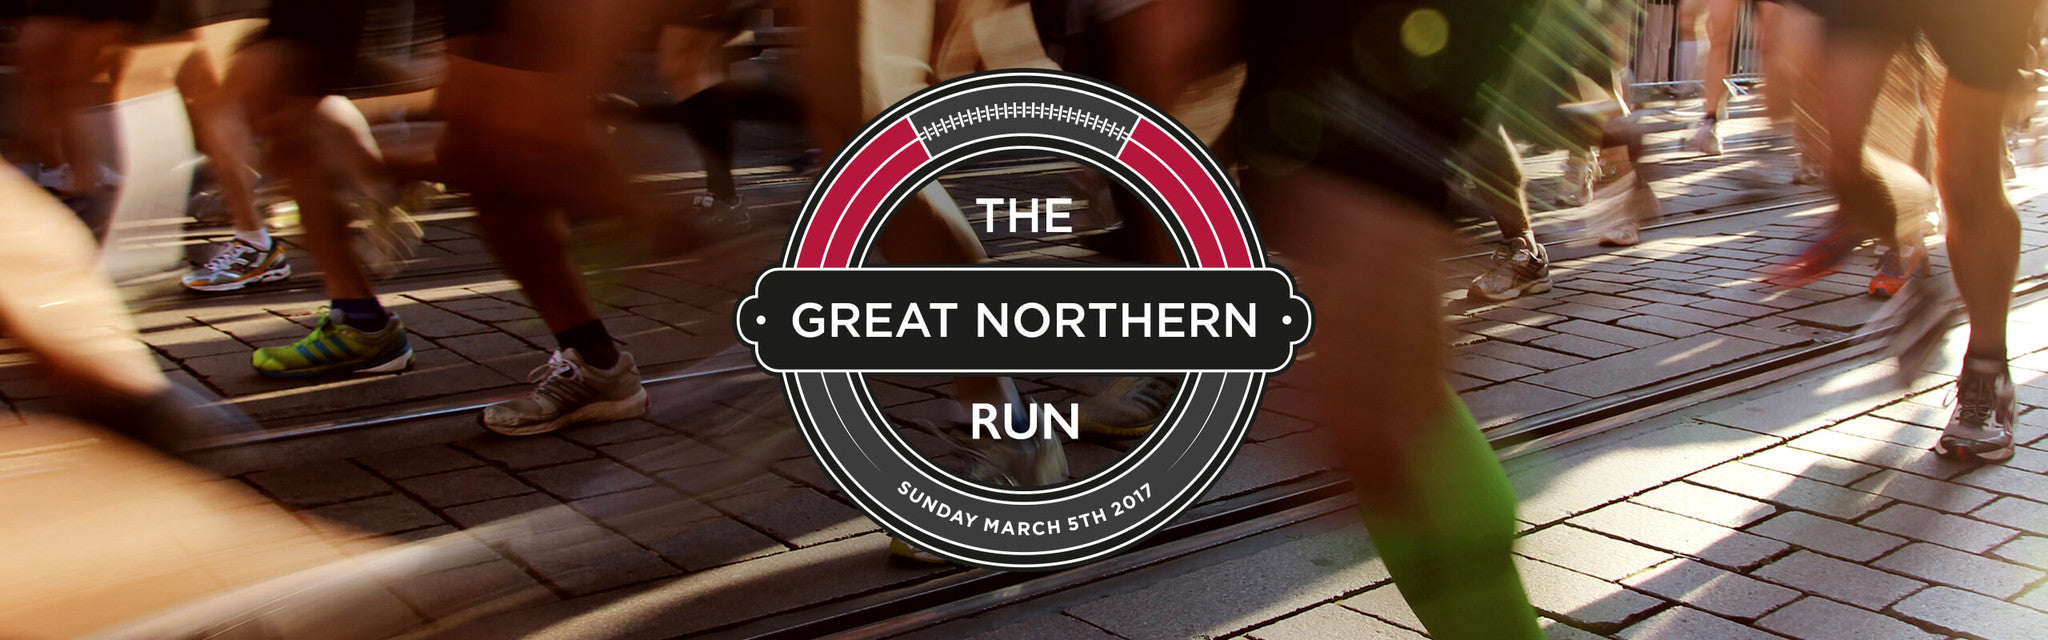 Great Northern Running Event- Sunday March 5 2017